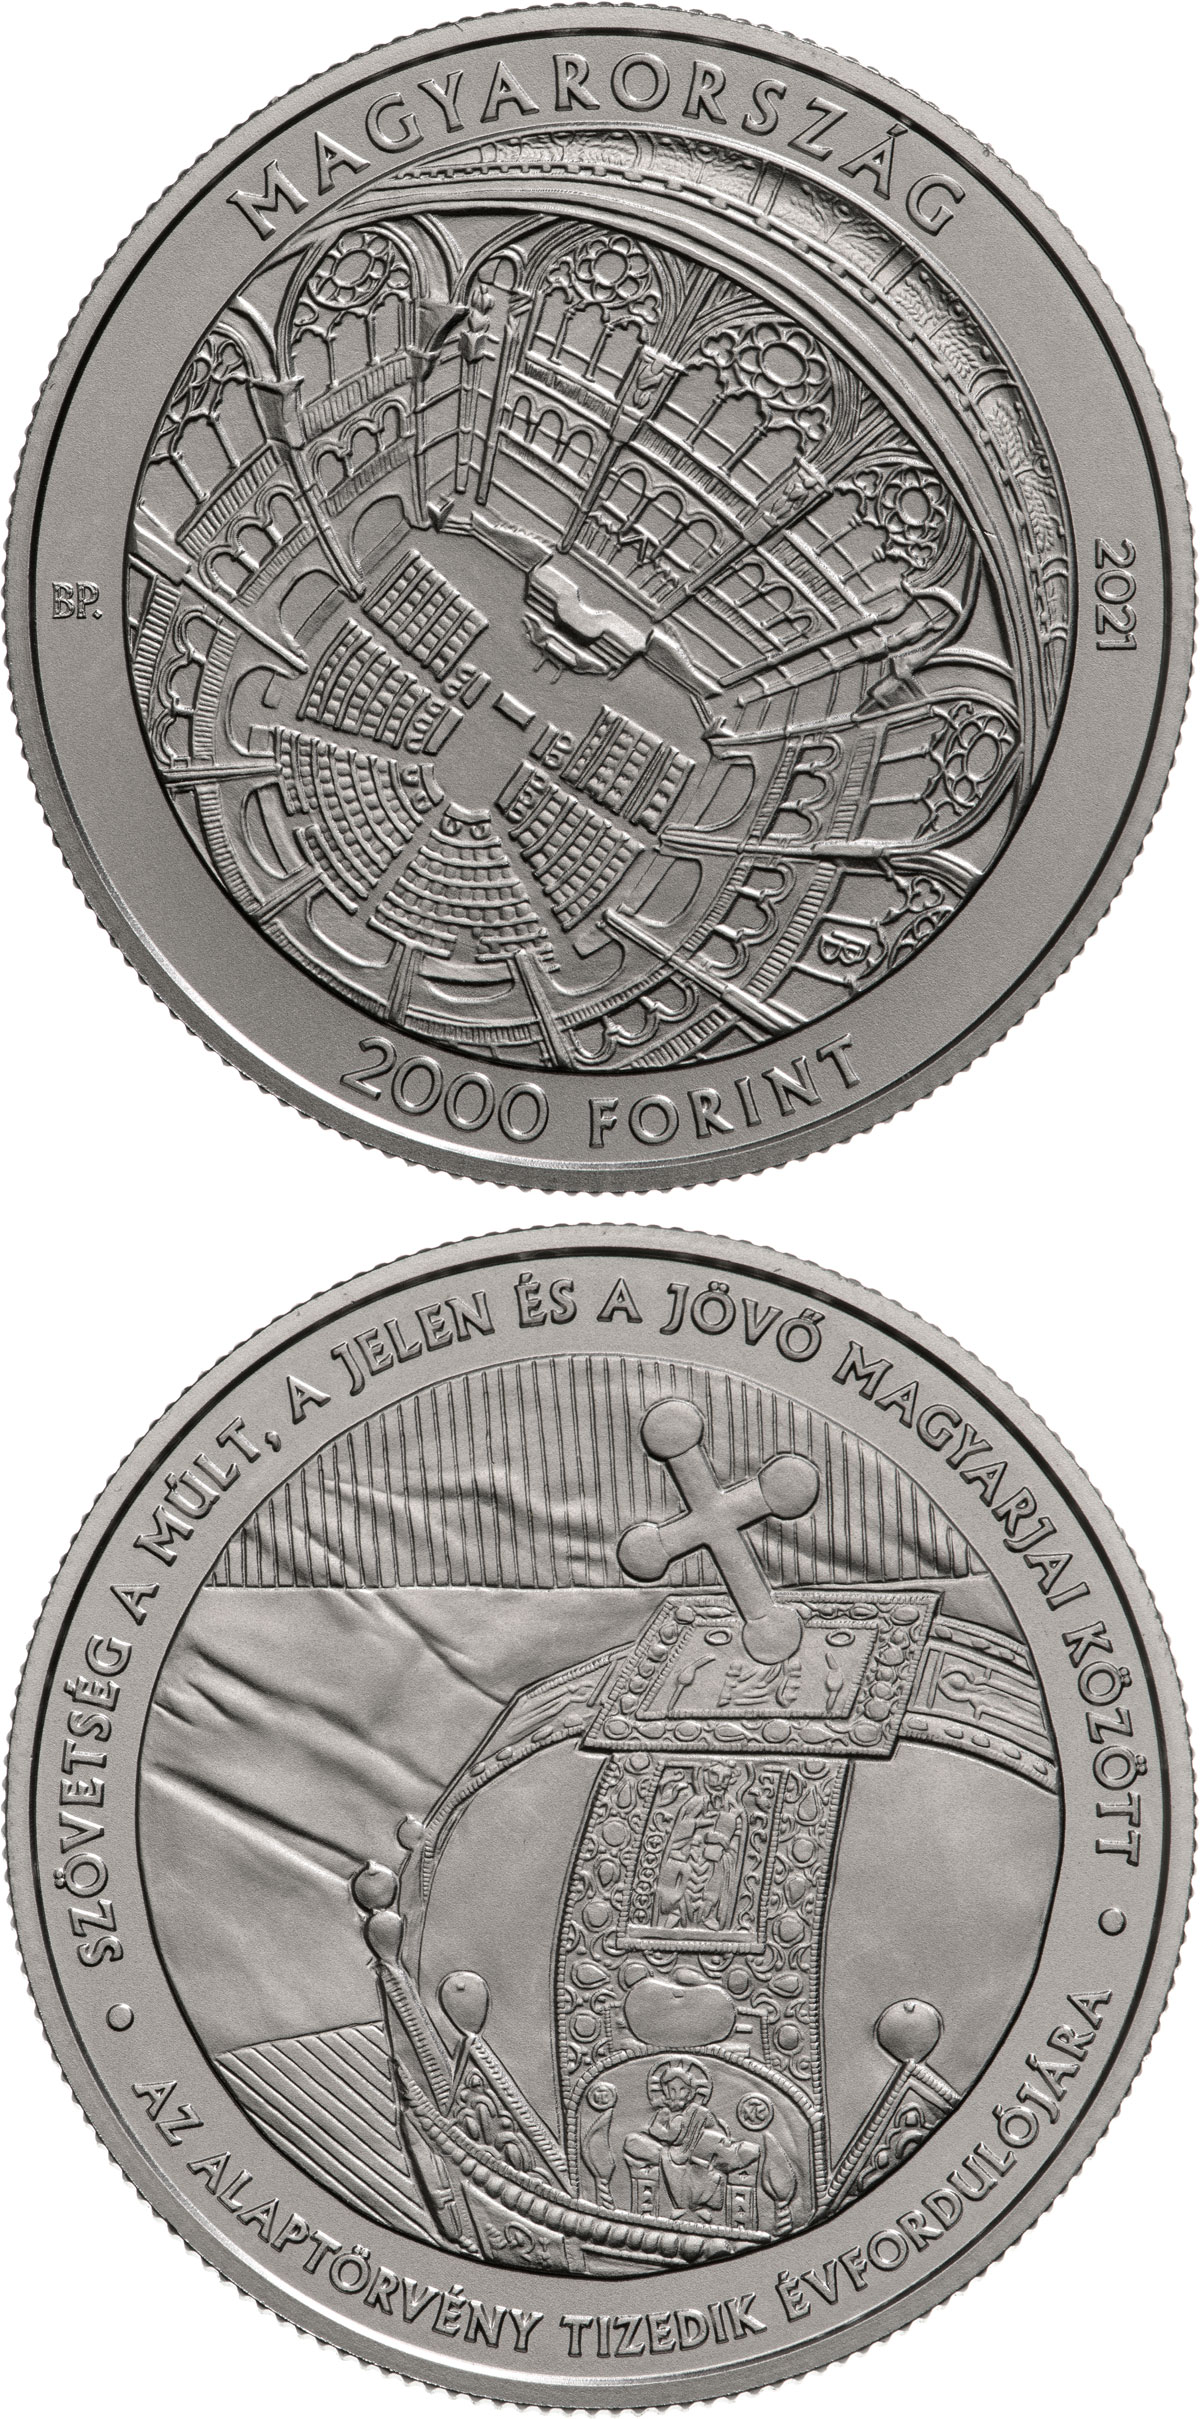 Image of 2000 forint coin - 10th anniversary of the Fundamental Law entering into force | Hungary 2021.  The Copper–Nickel (CuNi) coin is of BU quality.